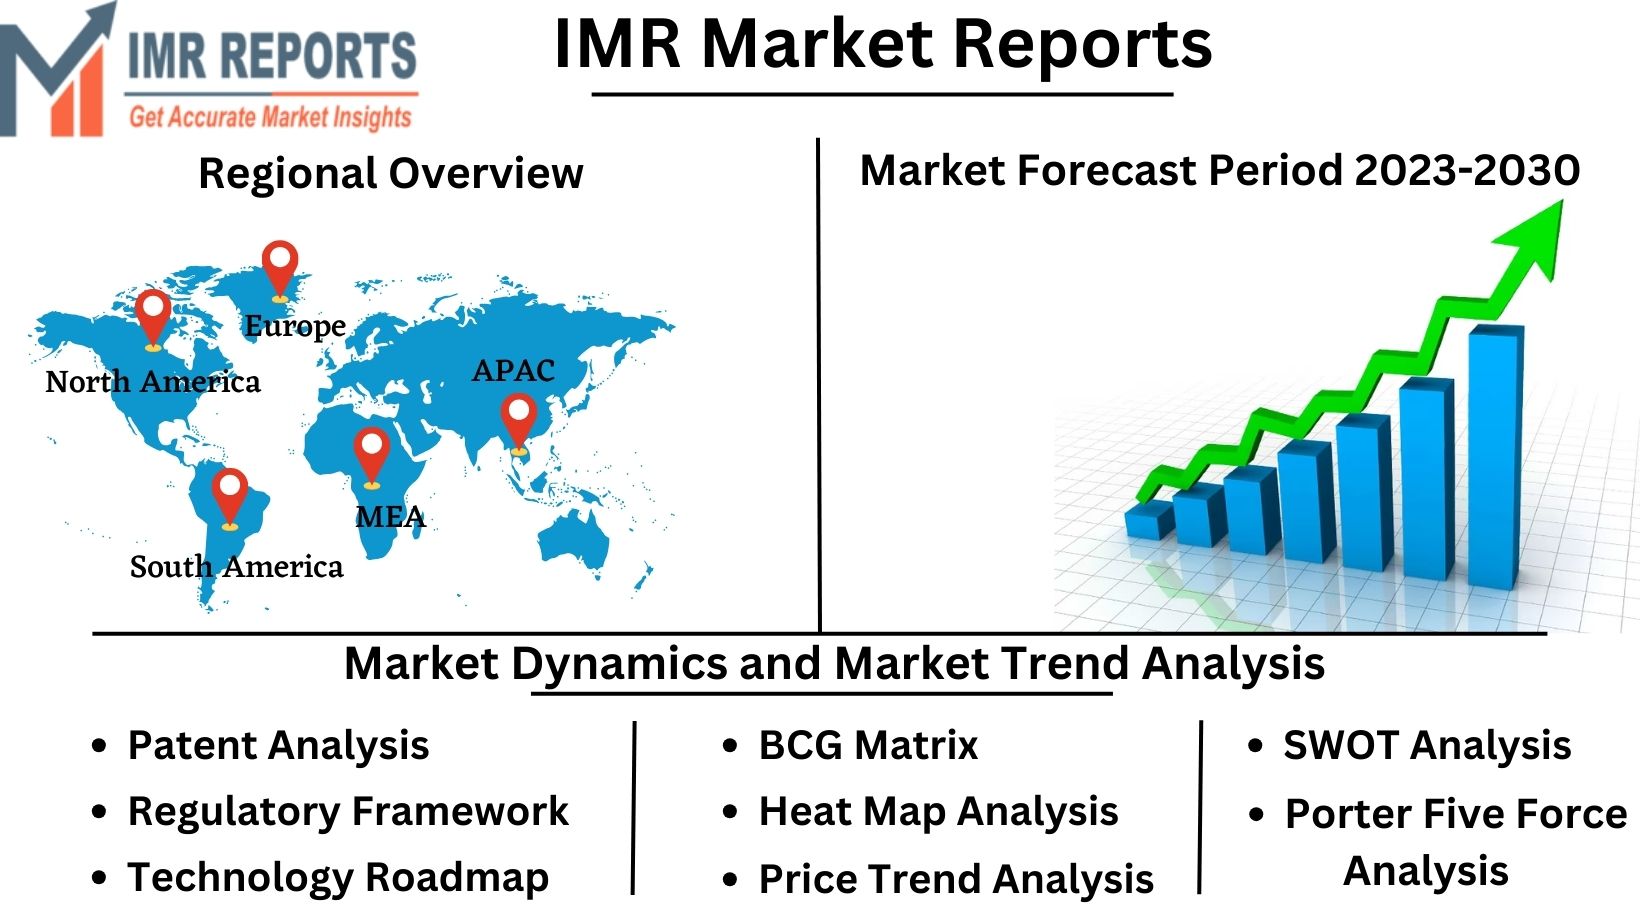 IMR_Market_Reports_(1)67